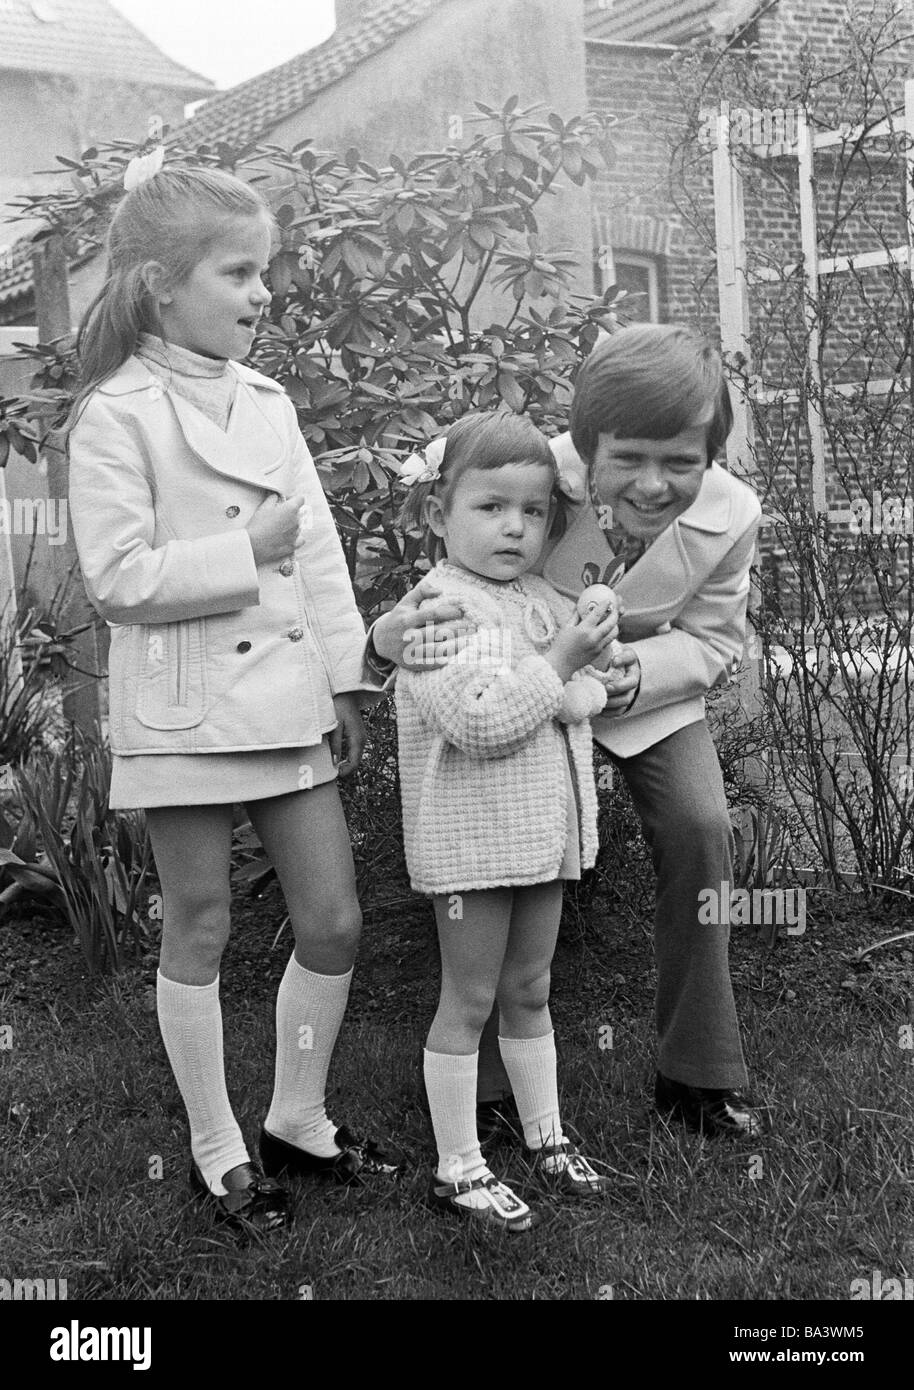 Seventies, black and white photo, people, children, two girls and a boy posing, aged 7 to 9 years, aged 3 to 4 years, aged 11 to 13 years, Birgit, Andrea, Frank Stock Photo